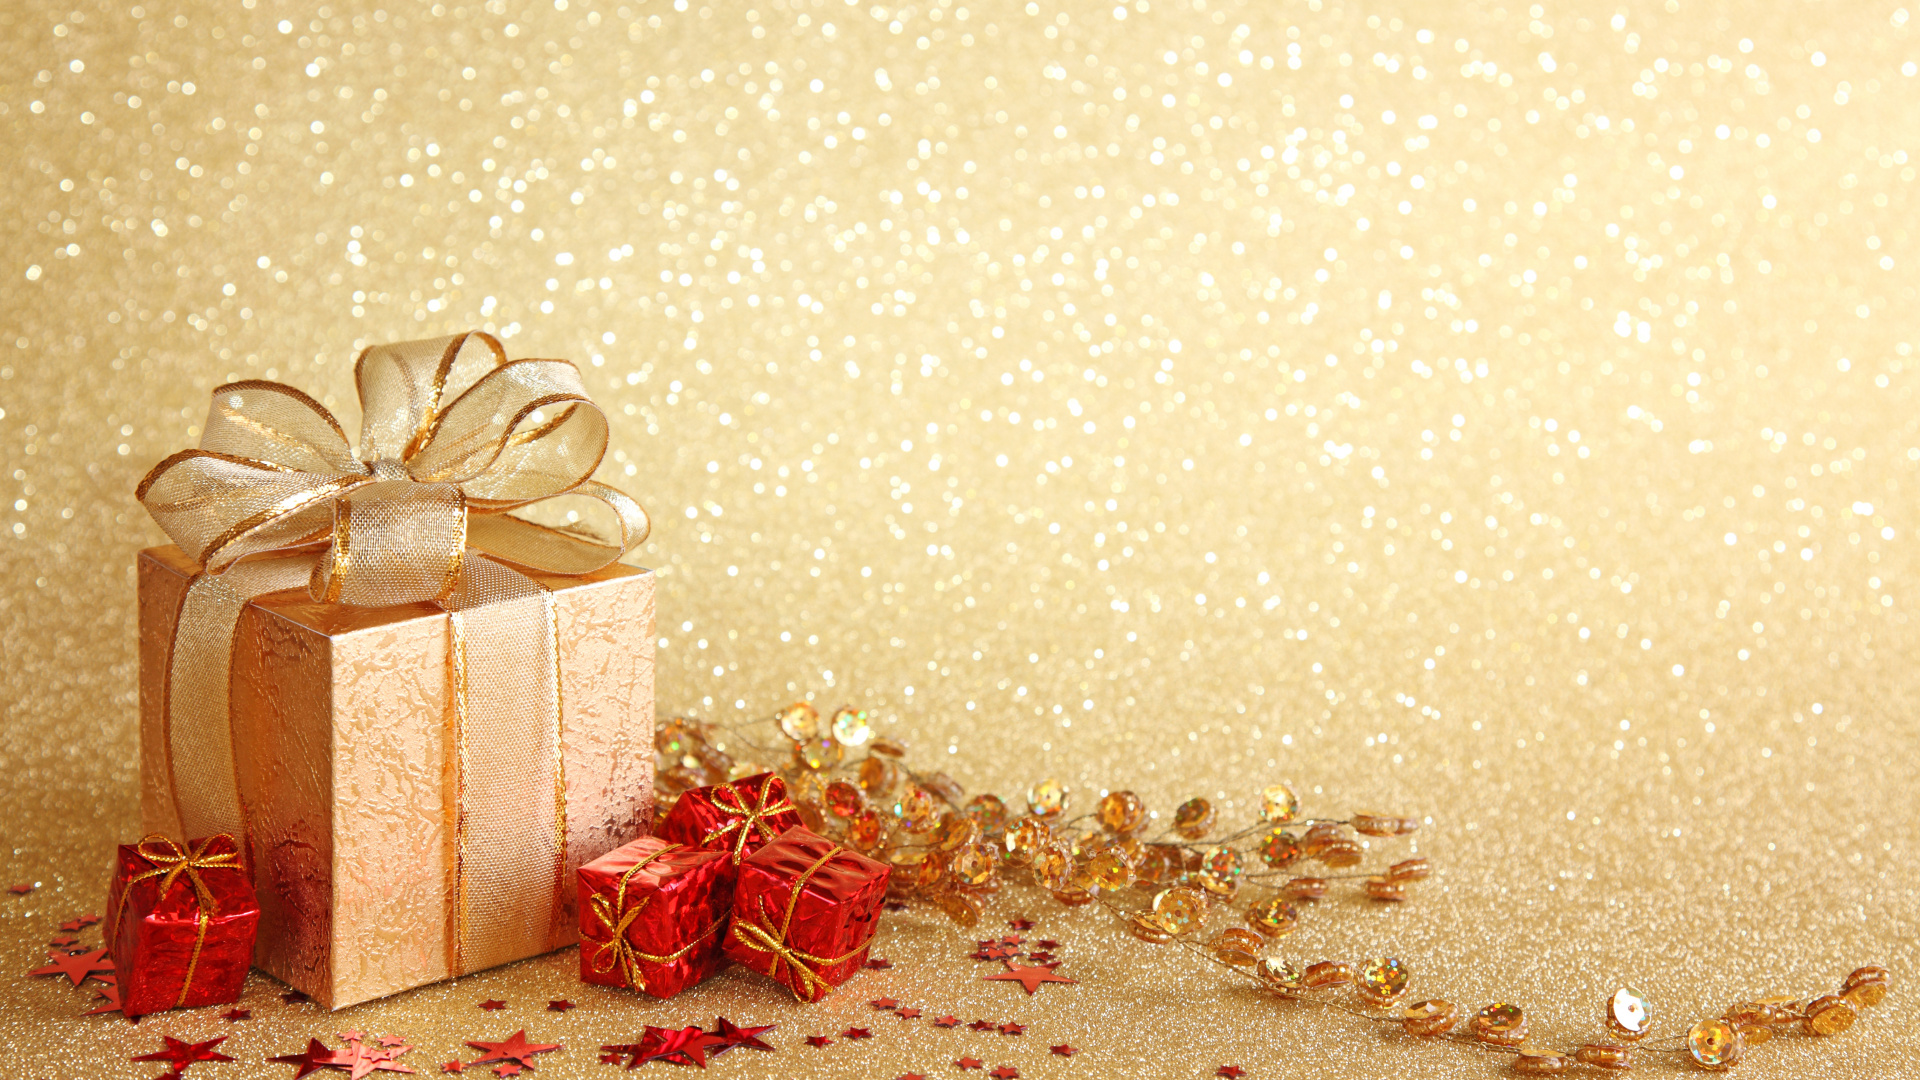 New Year, Happiness, Wish, Christmas Day, Present. Wallpaper in 1920x1080 Resolution